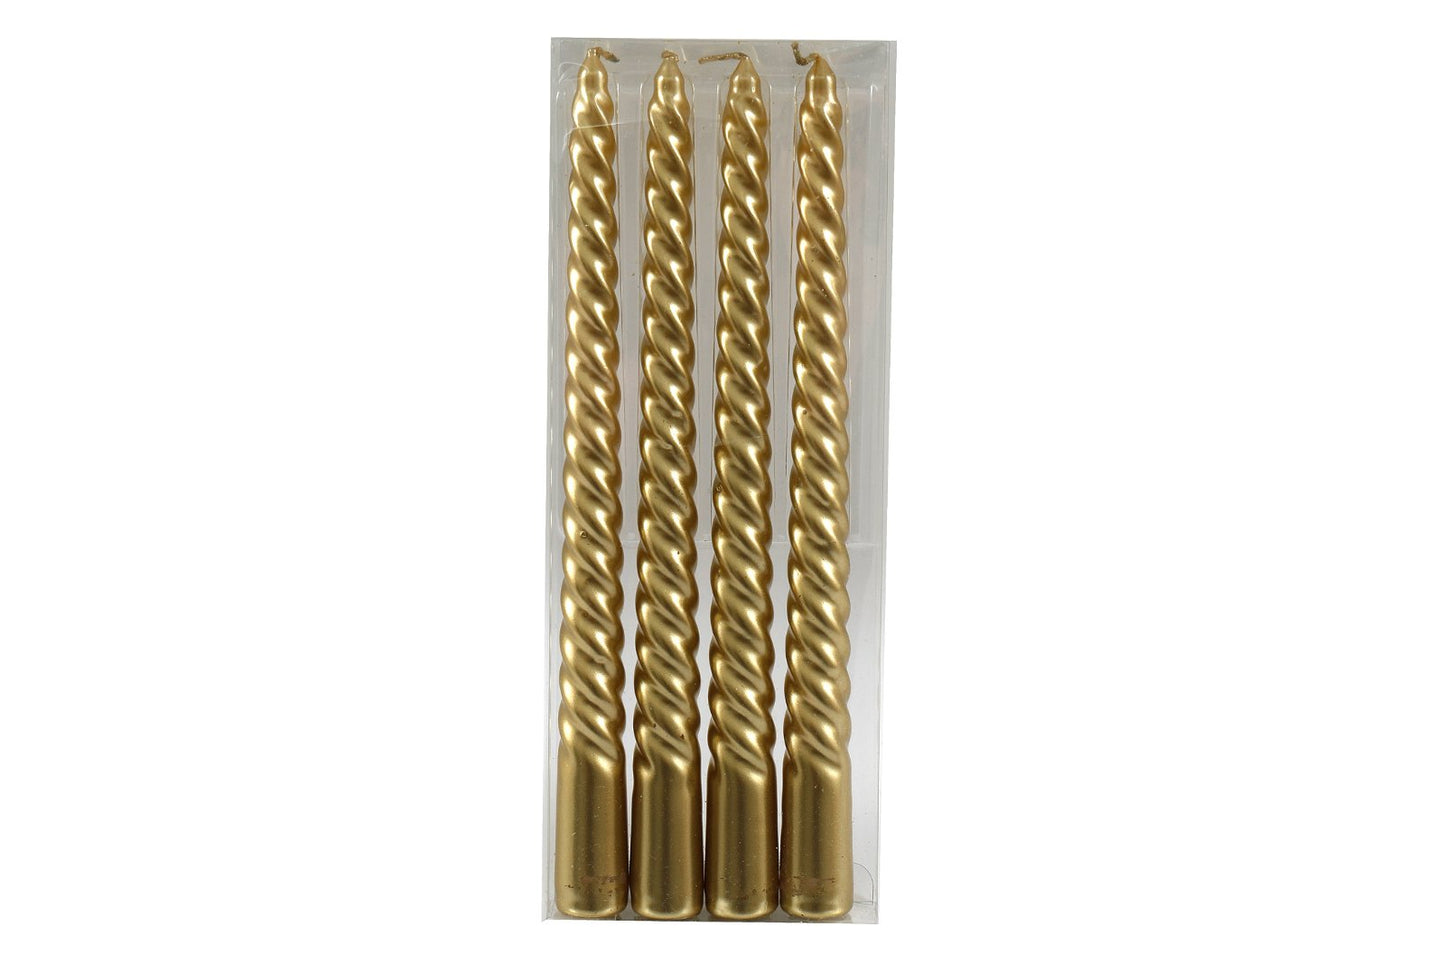 Set of Four Gold Twist Taper Candles - a Cheeky Plant